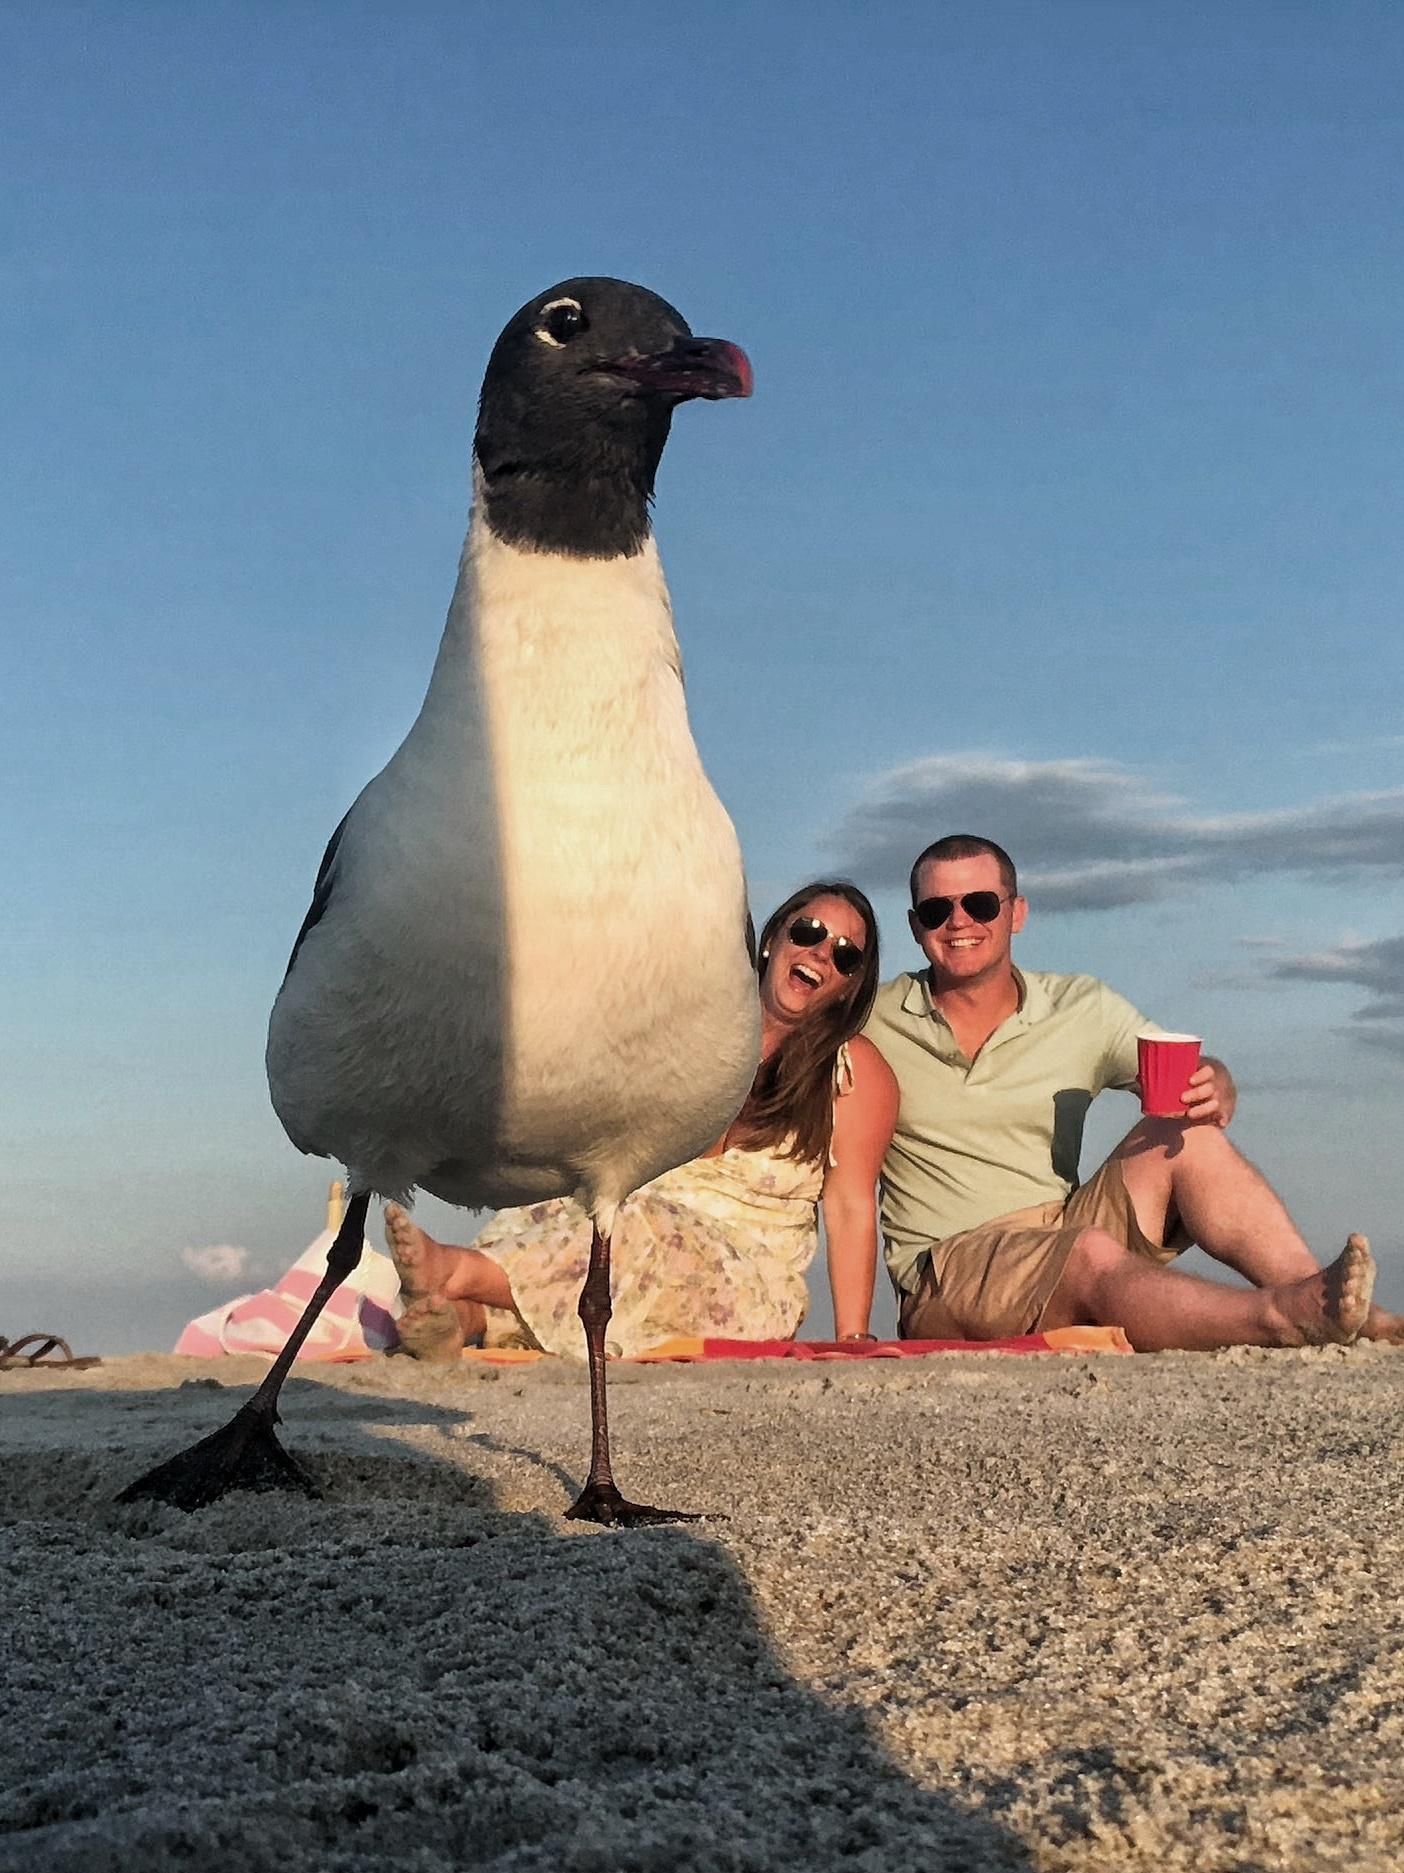 Girlfriend and I got photobombed by a seagull this weekend while trying to take a self timed photo!